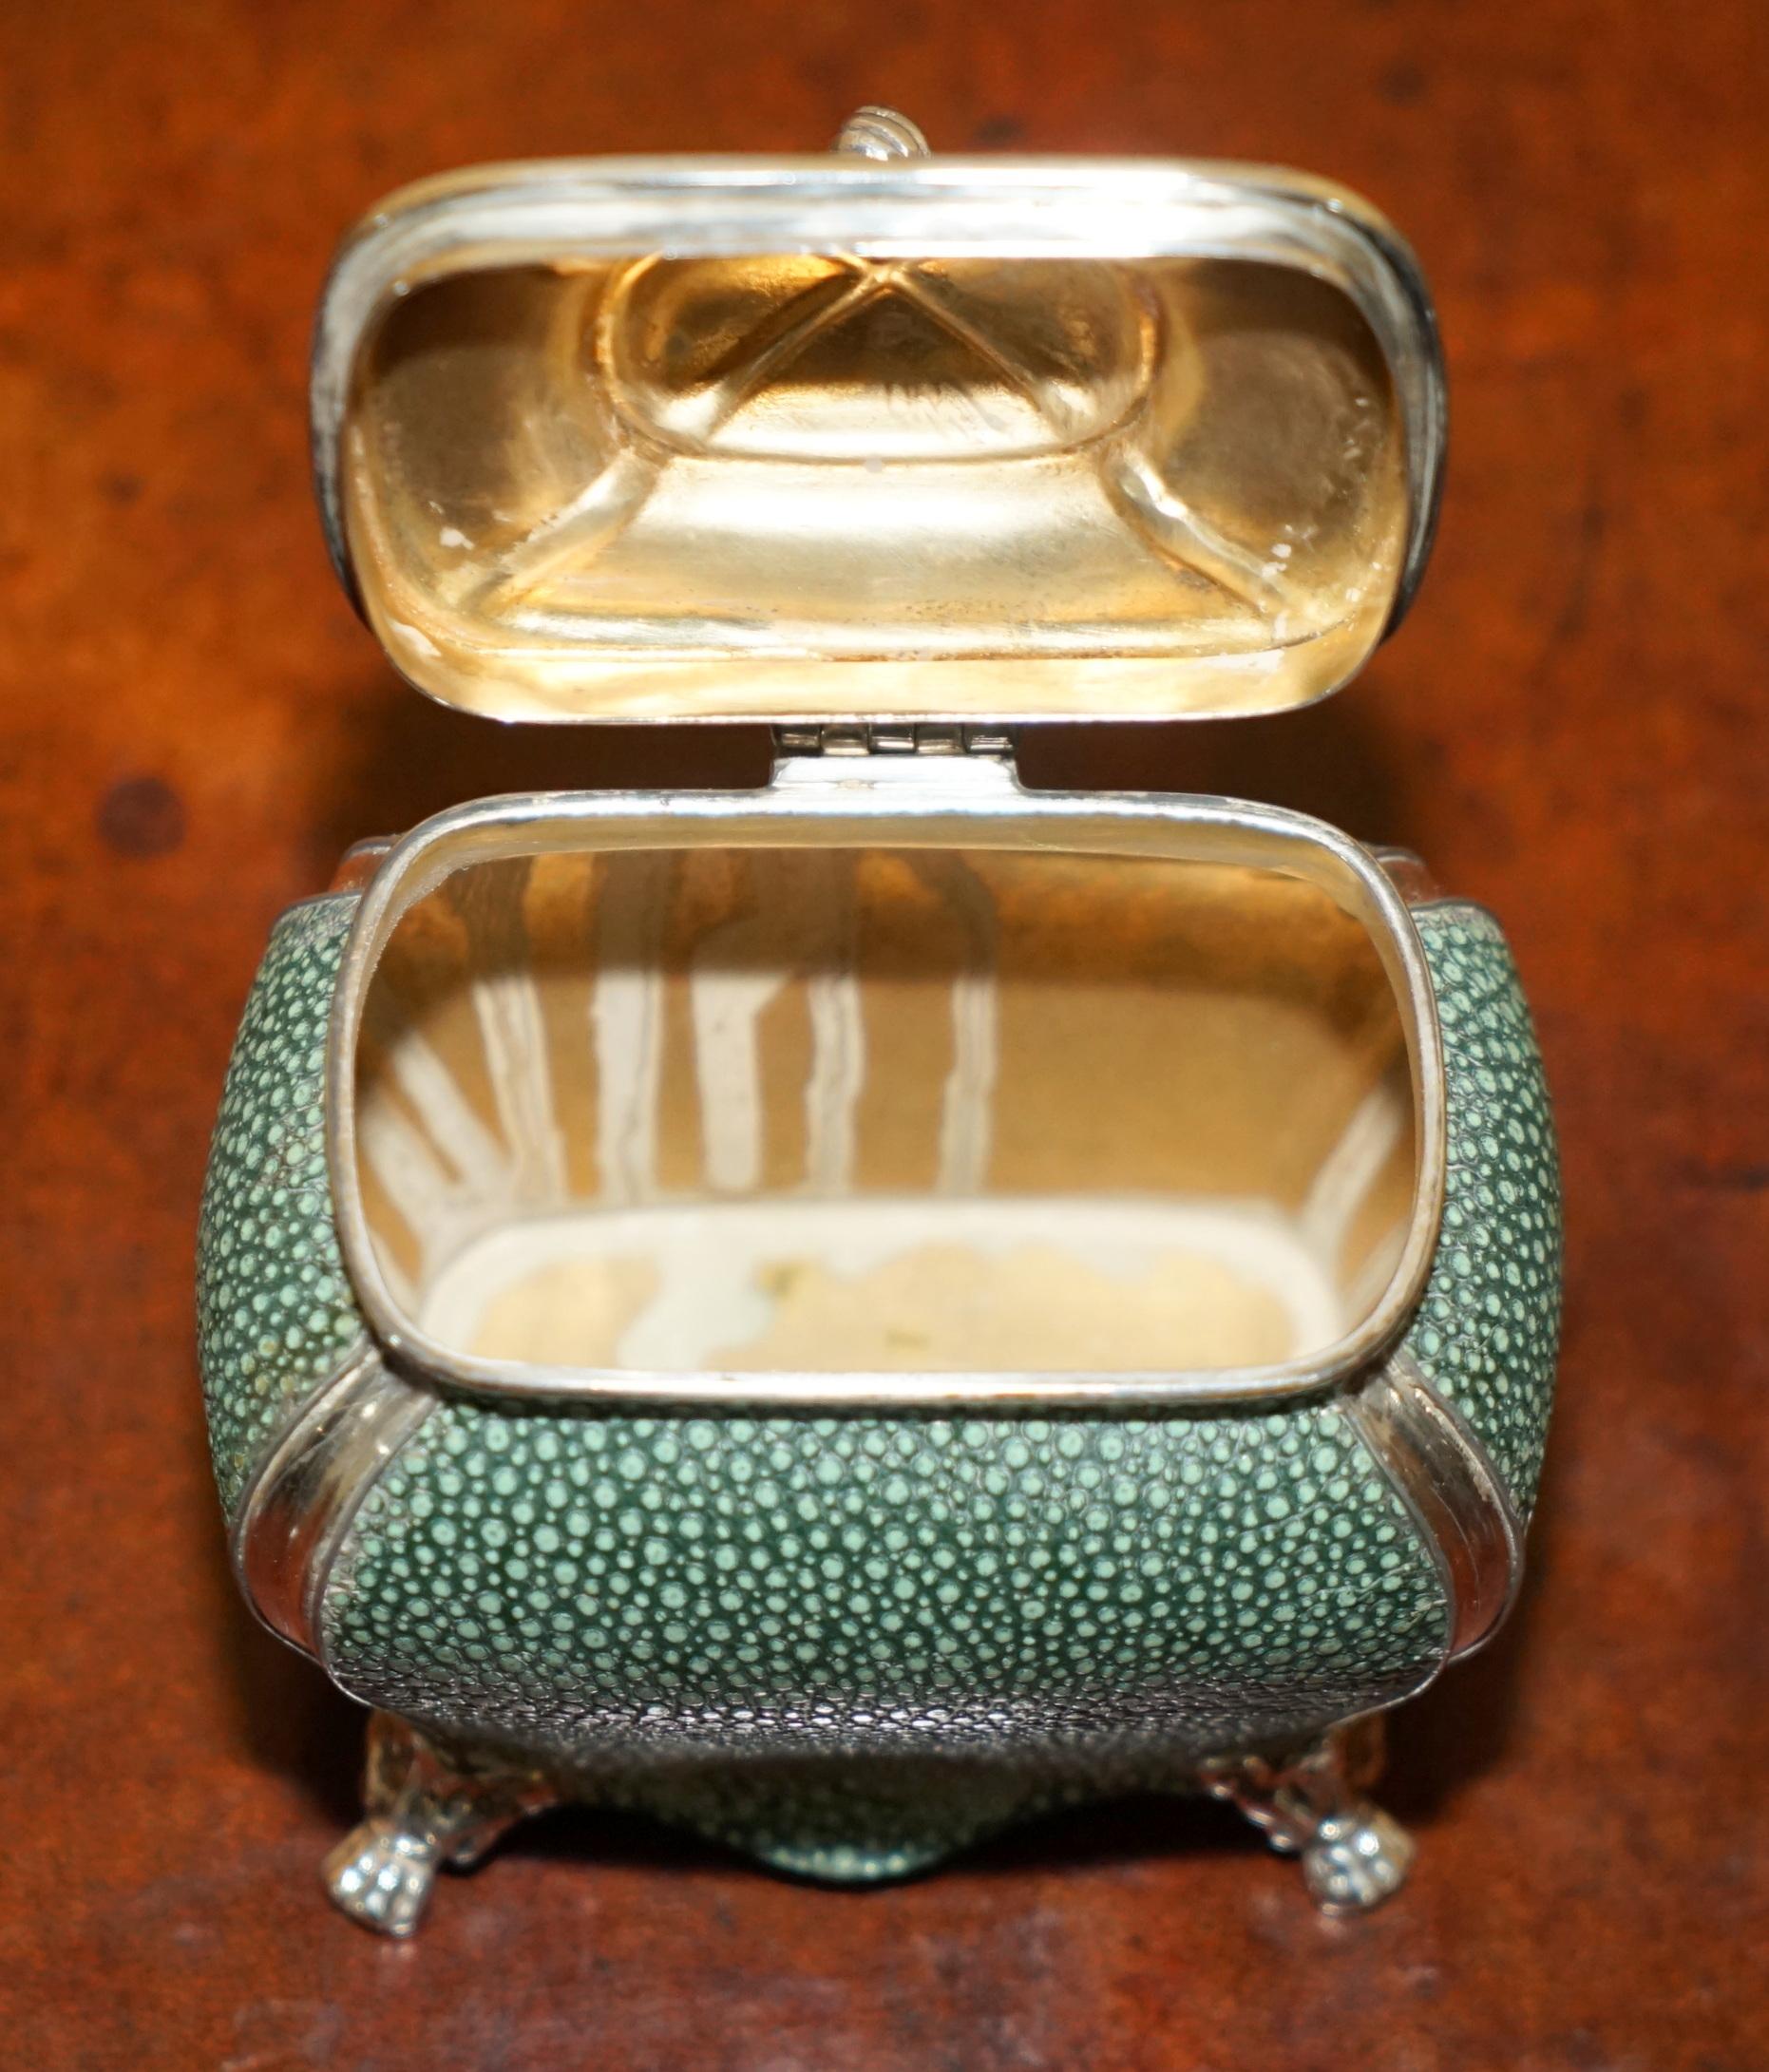 FINE ANTIQUE VICTORIAN 1895 NATHAN & HAYES SHAGREEN EPNS SiLVER TEA CADDY 2